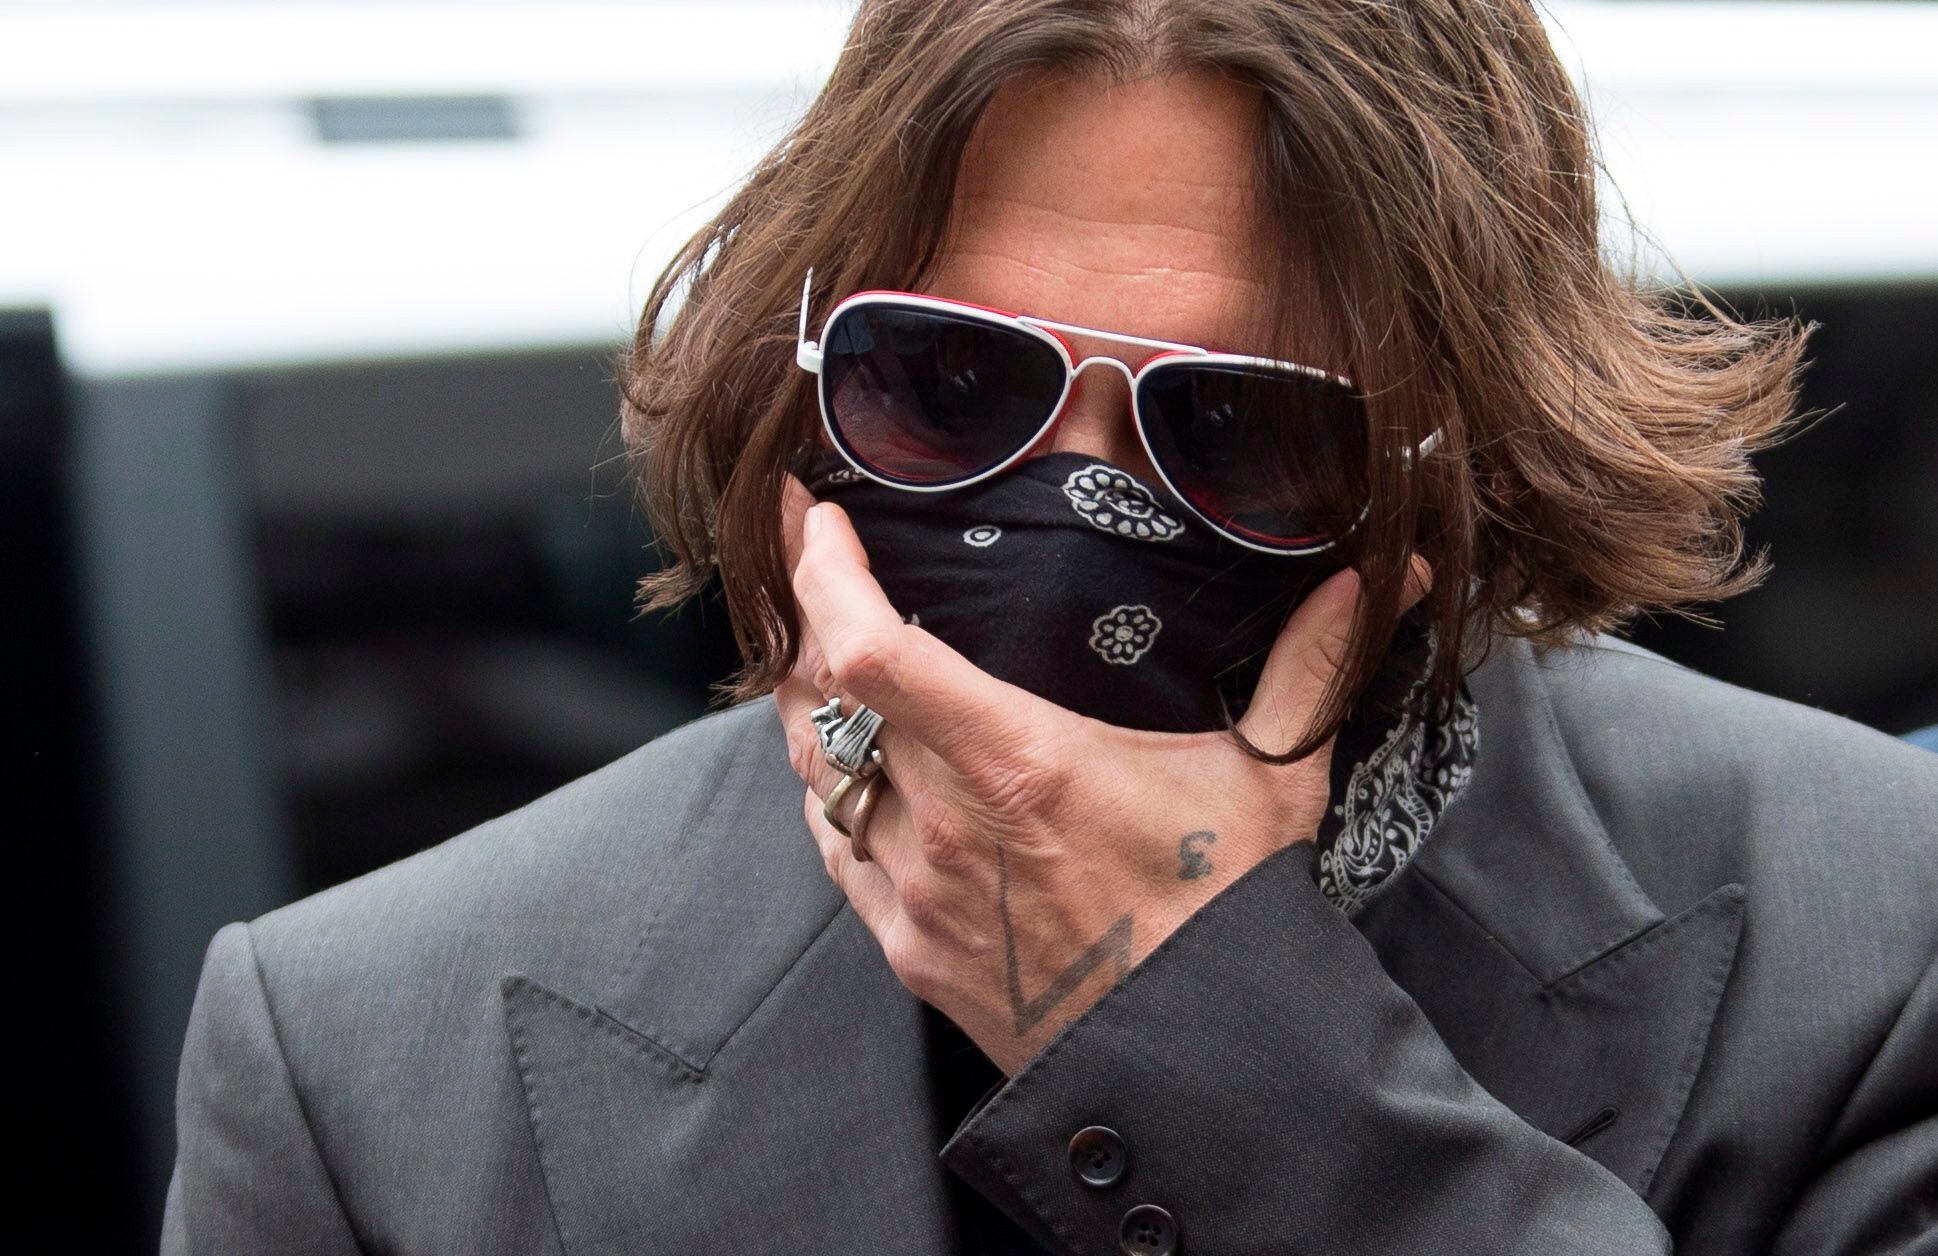 London (United Kingdom).- (FILE) - US actor Johnny Depp, wearing a face mask, arrives at the Royal Courts of Justice in London, Britain, 08 July 2020 (reissued 25 March 2021). A judge on 25 March 2021 refused Johnny Depp the permission to appeal the High Court ruling. Depp was appealing the verdict after he lost his case when suing The Sun's newspaper publisher News Group Newspapers (NGN) over claims he abused his ex-wife Amber Heard. (Reino Unido, Londres) EFE/EPA/NEIL HALL *** Local Caption *** 56469599
